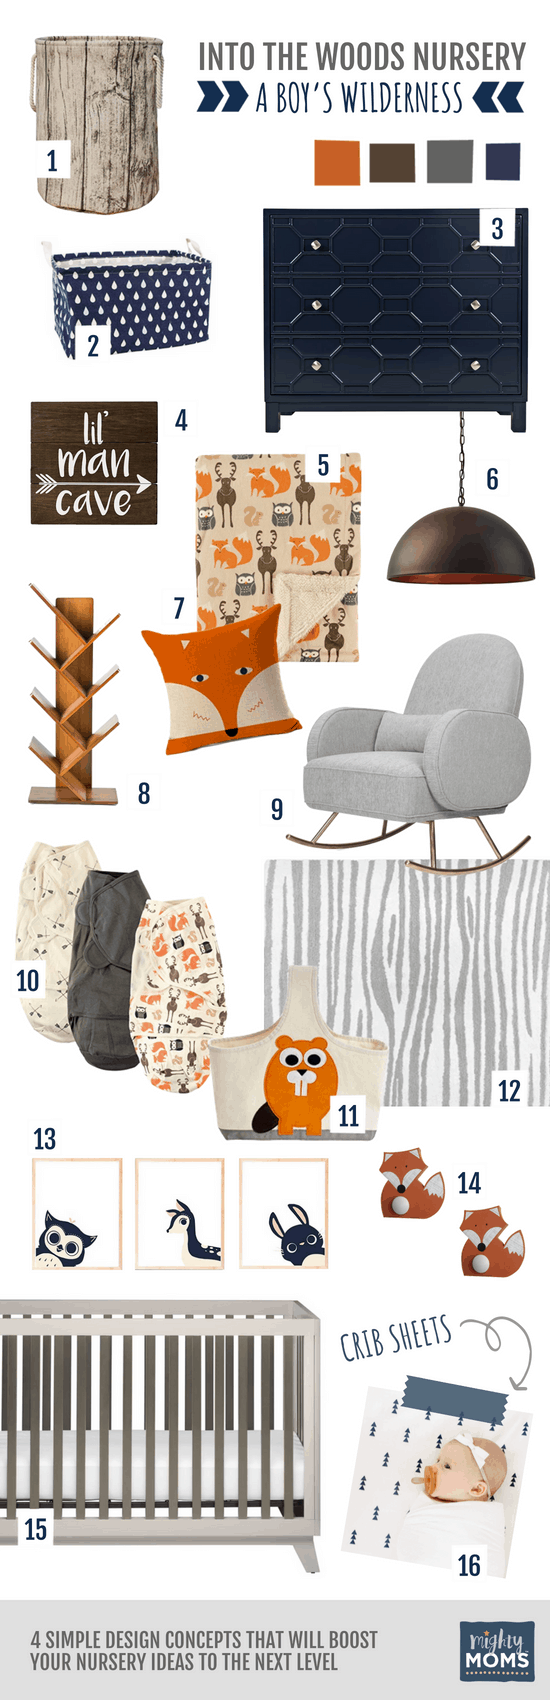 4 Design Concepts That Will Take Your Nursery Ideas to the Next Level